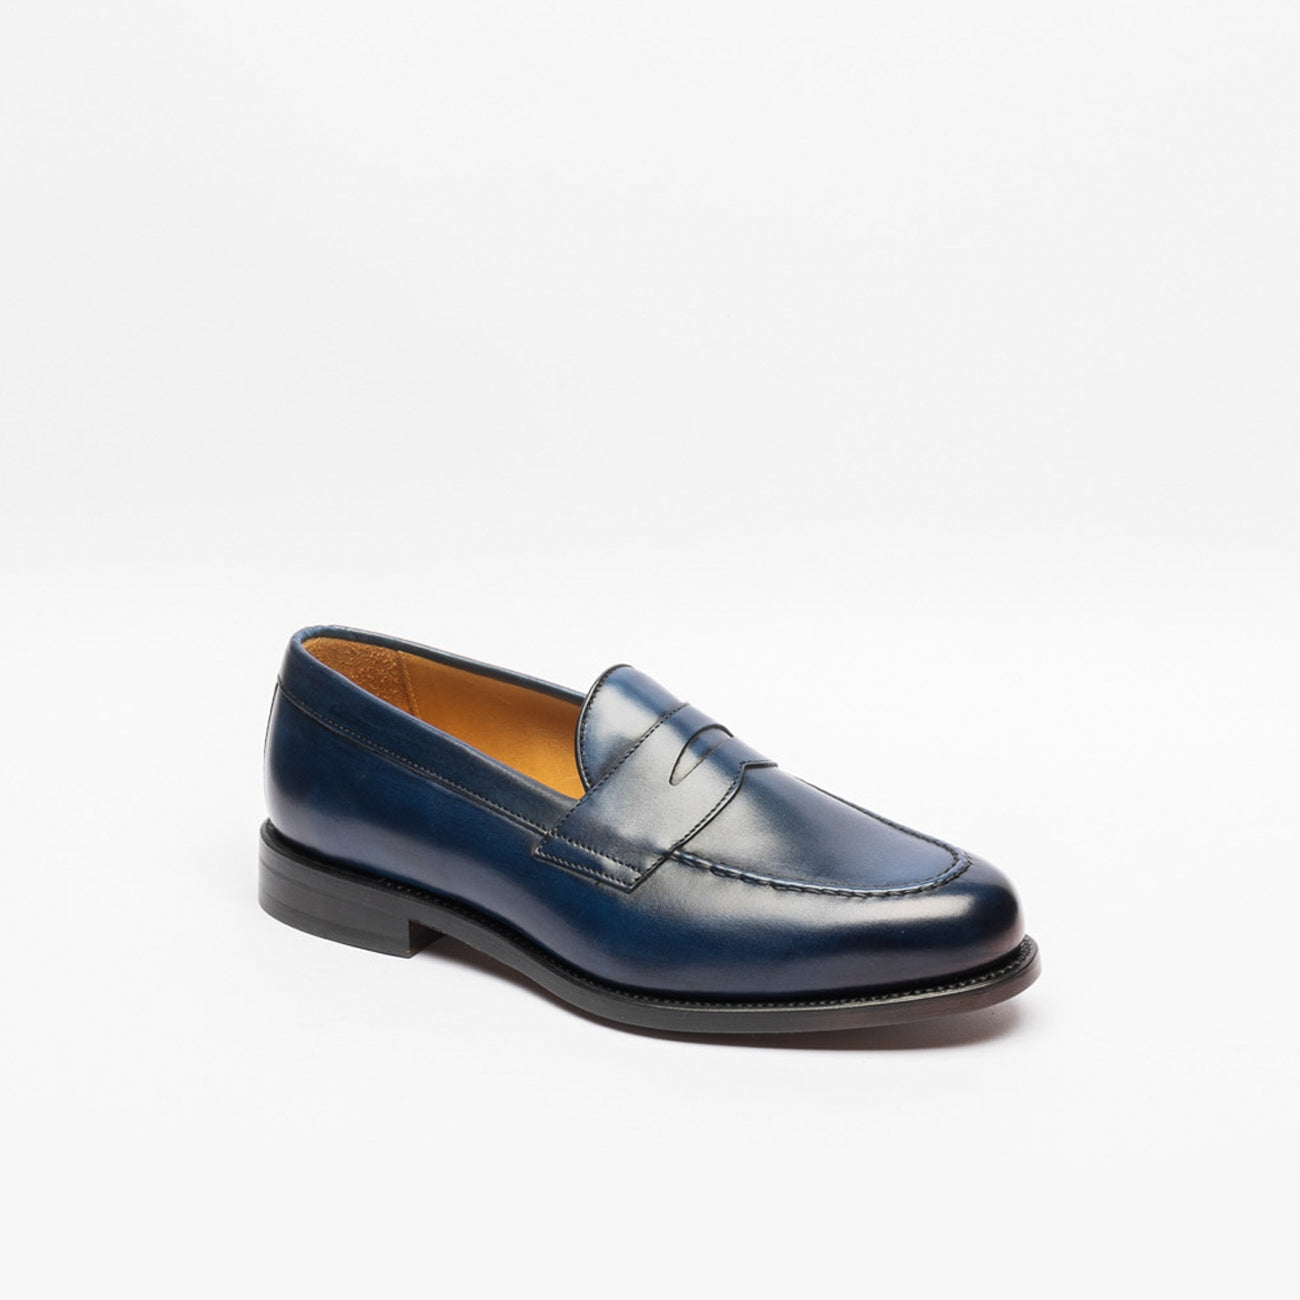 Berwick blue leather penny loafer